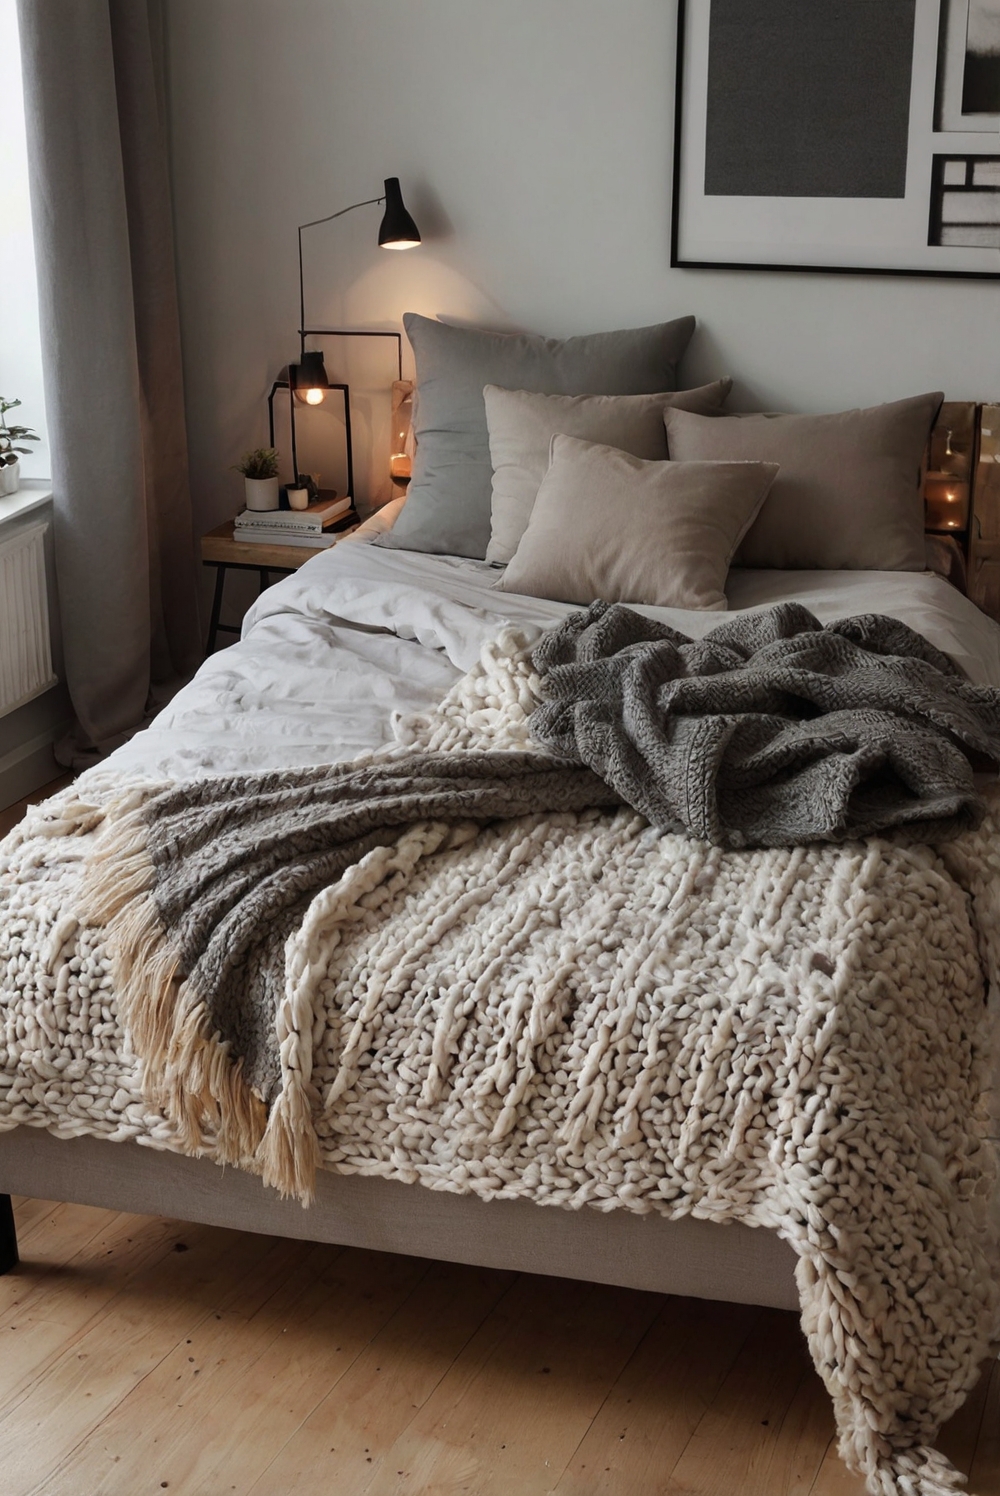 How to use blankets and throws to add warmth and decoration to your bed?